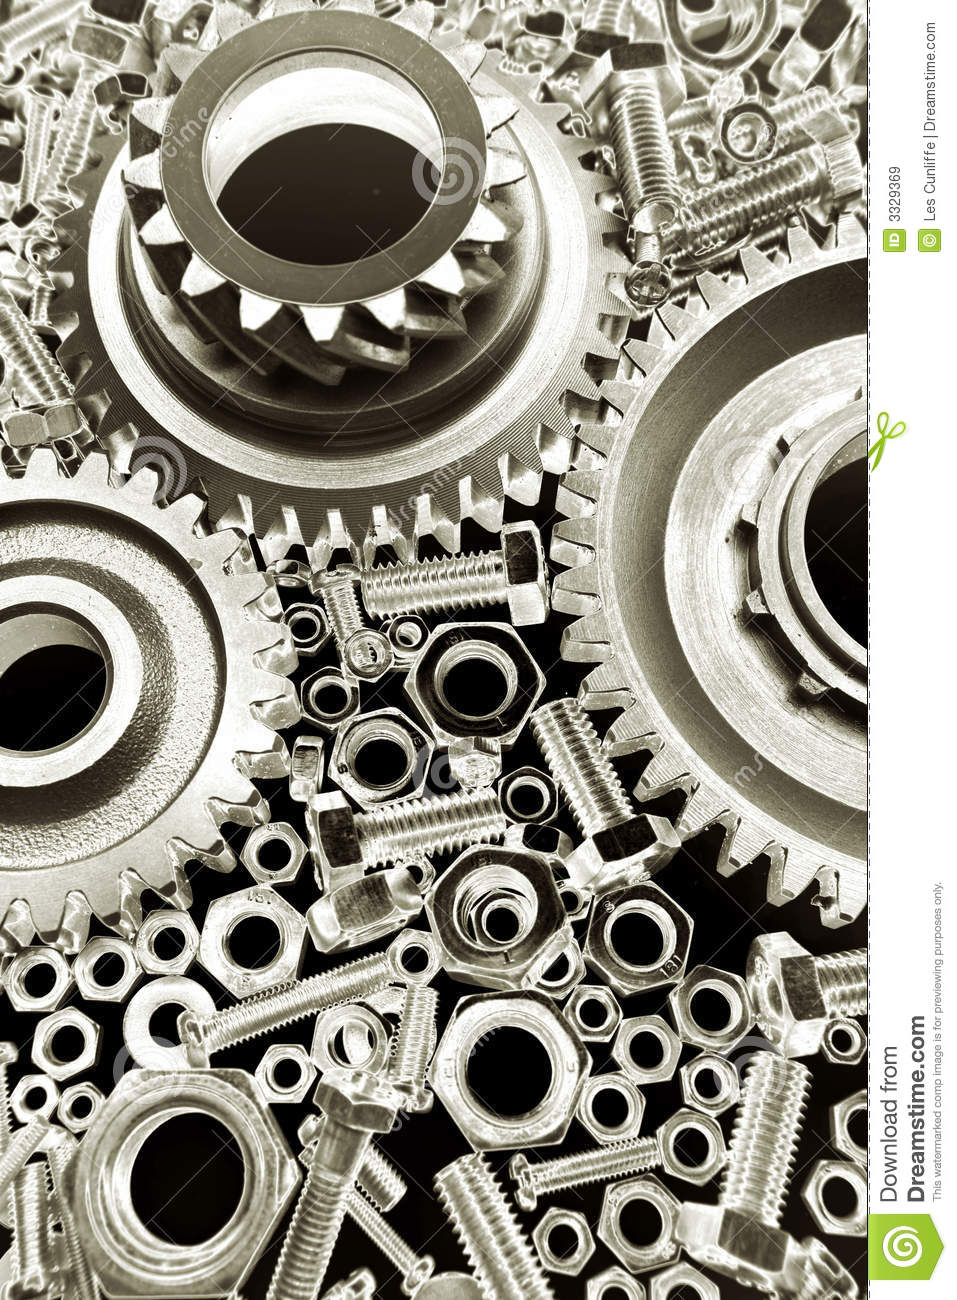 Gears Nuts   Bolts Royalty Free Stock Images   Image  3329369